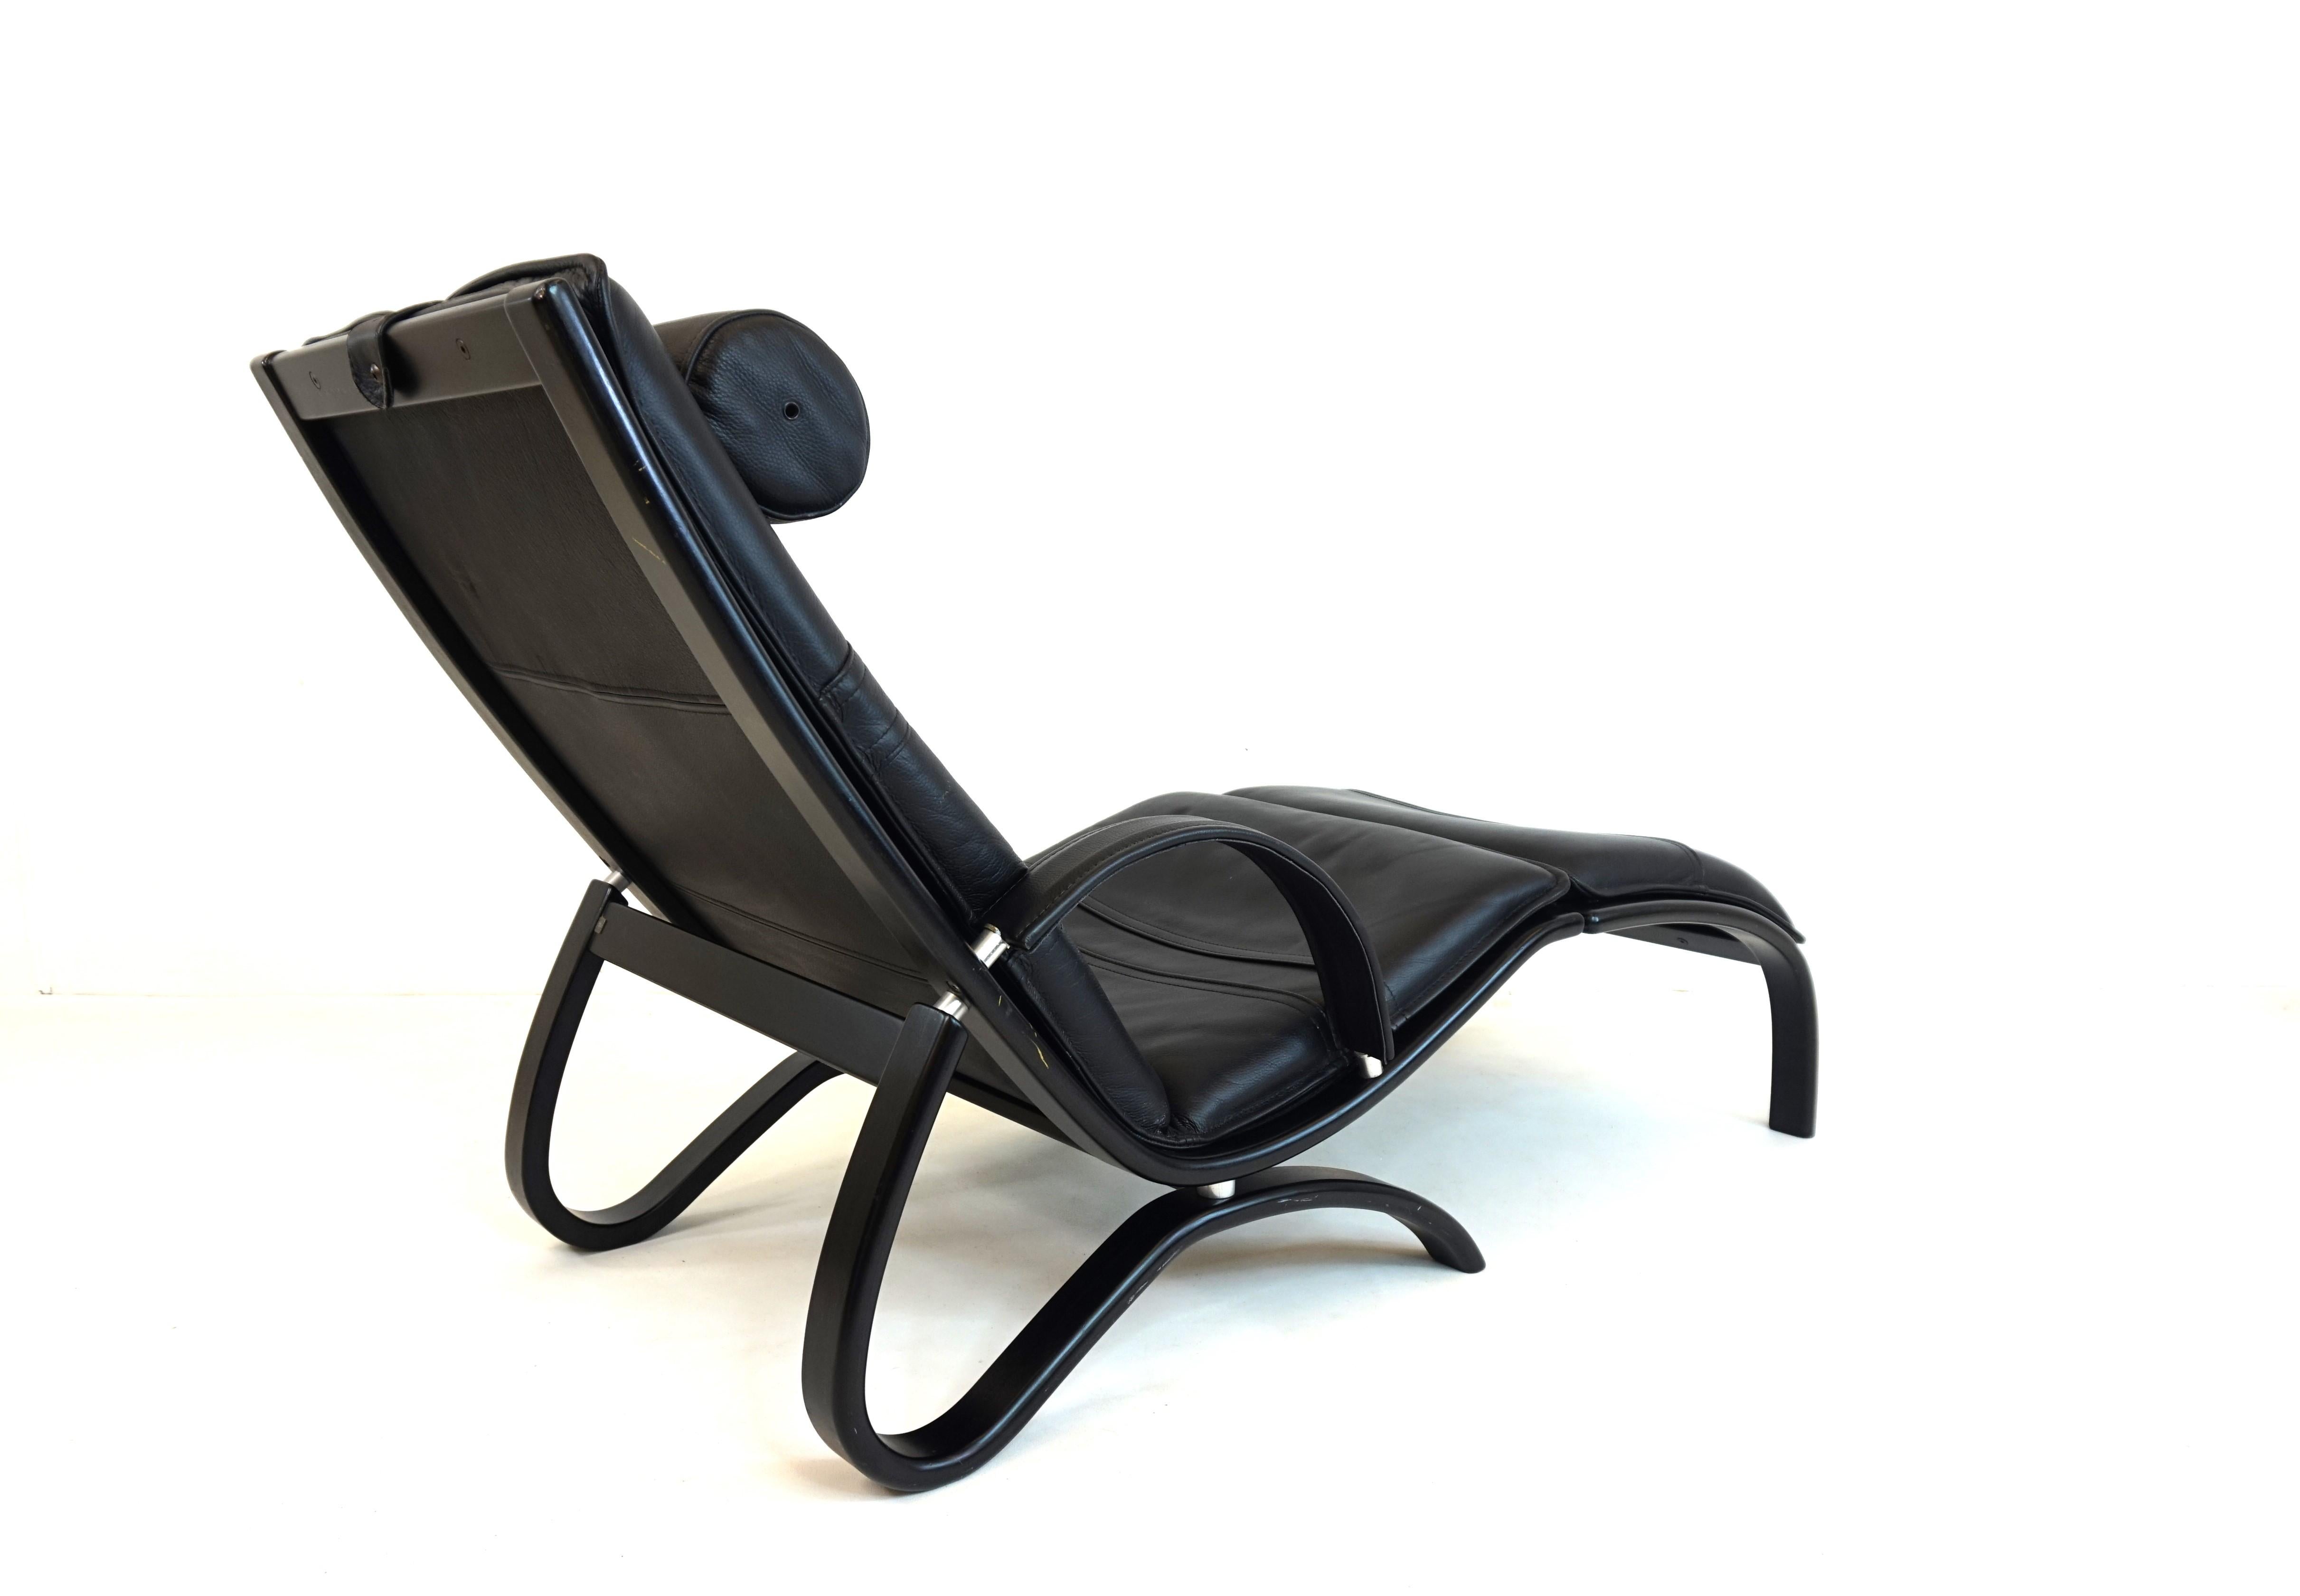 An exceptional leather armchair from Nelo, made of black leather with a semi-integrated ottoman. This armchair can be quickly converted into a reclining armchair using the attached ottoman. The extraordinary design once again shows the innovative